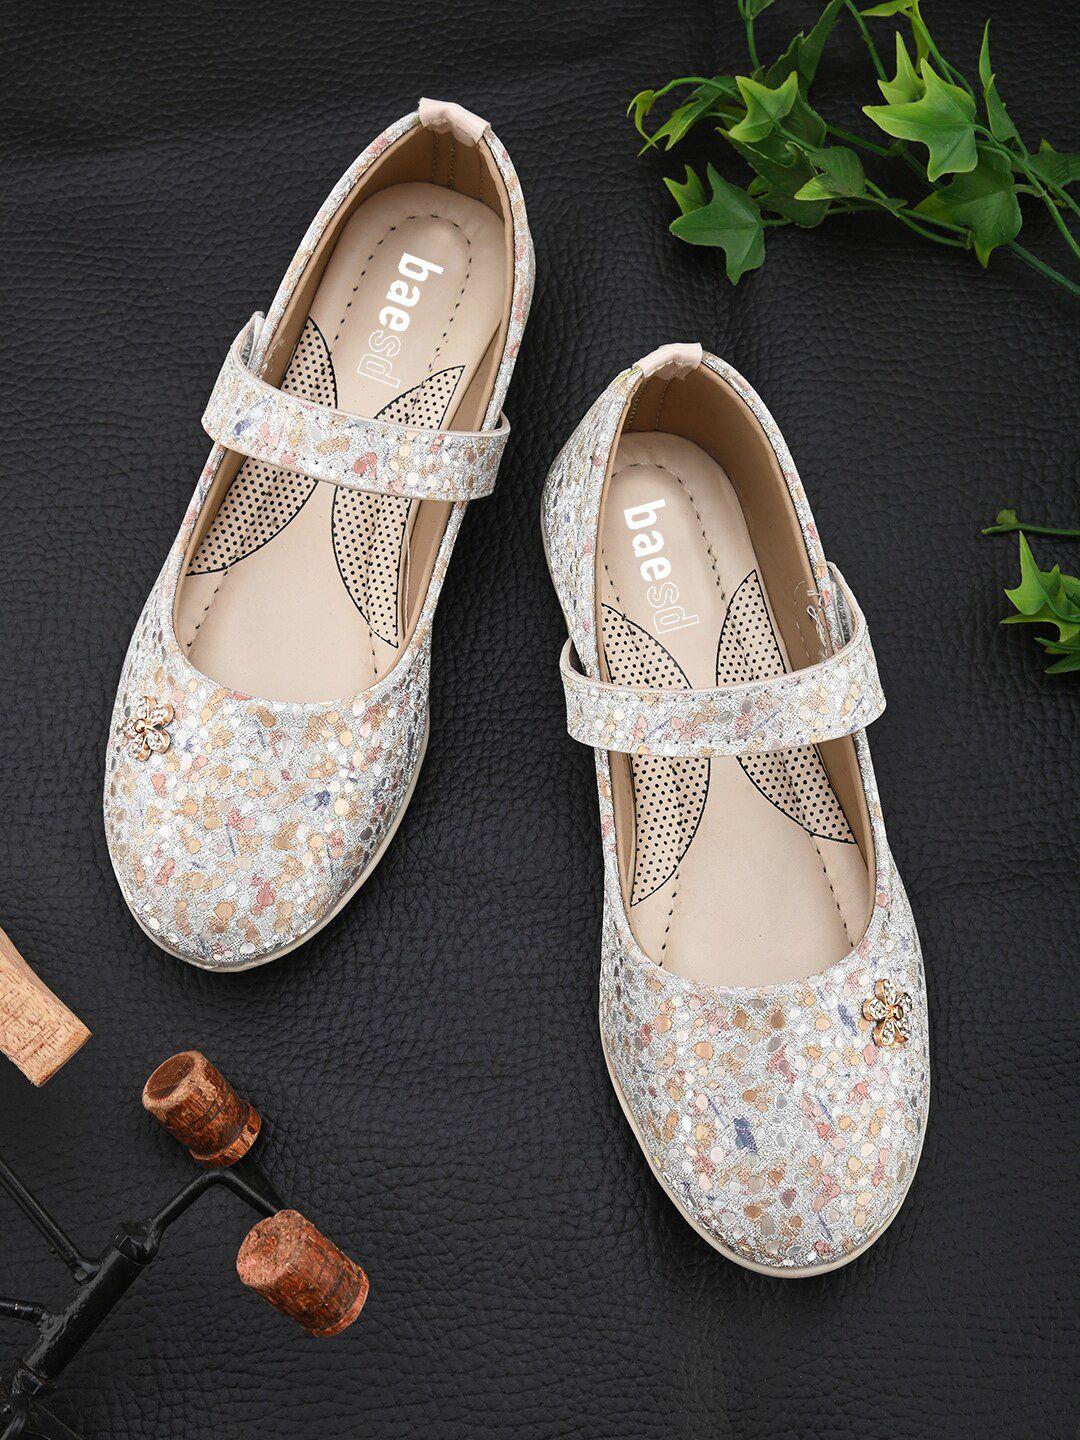 baesd-girls-embellished-party-ballerinas-flats